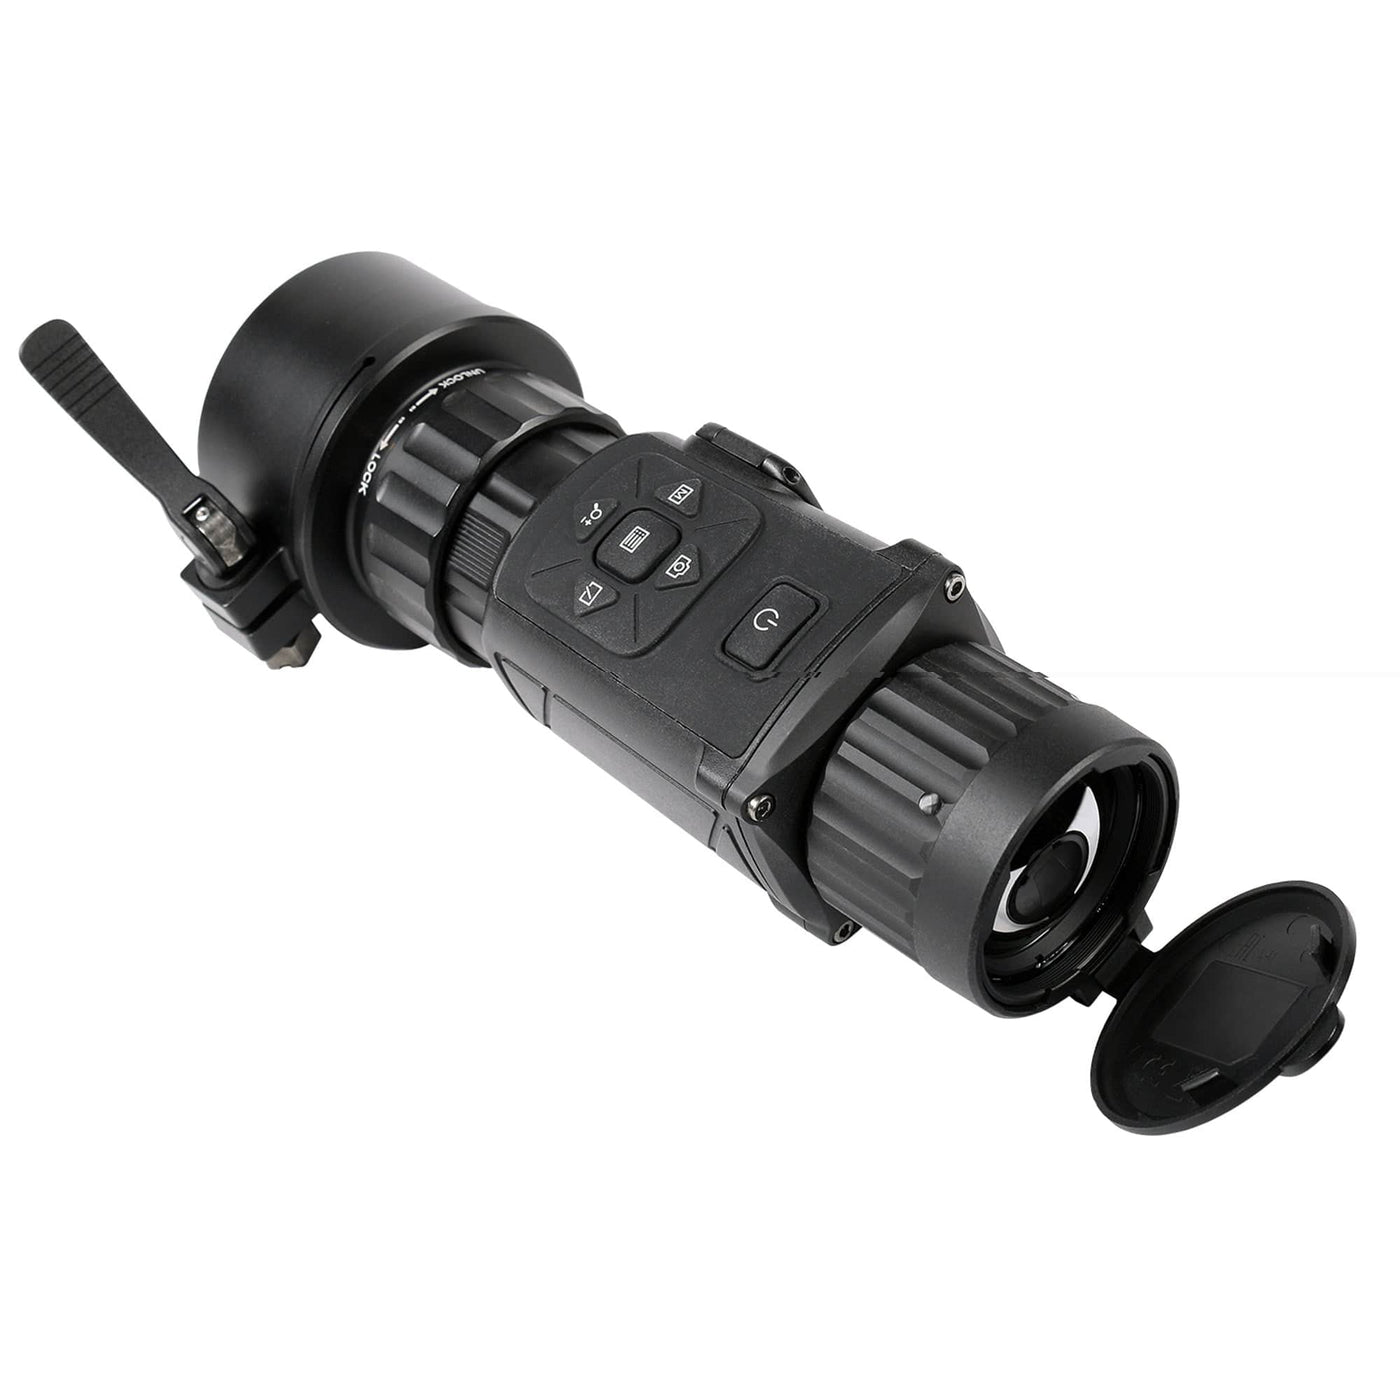 AGM AGM Rattler TS35-384 Thermal Imaging RifleScope 12um 384x288 Nightvision And Thermal